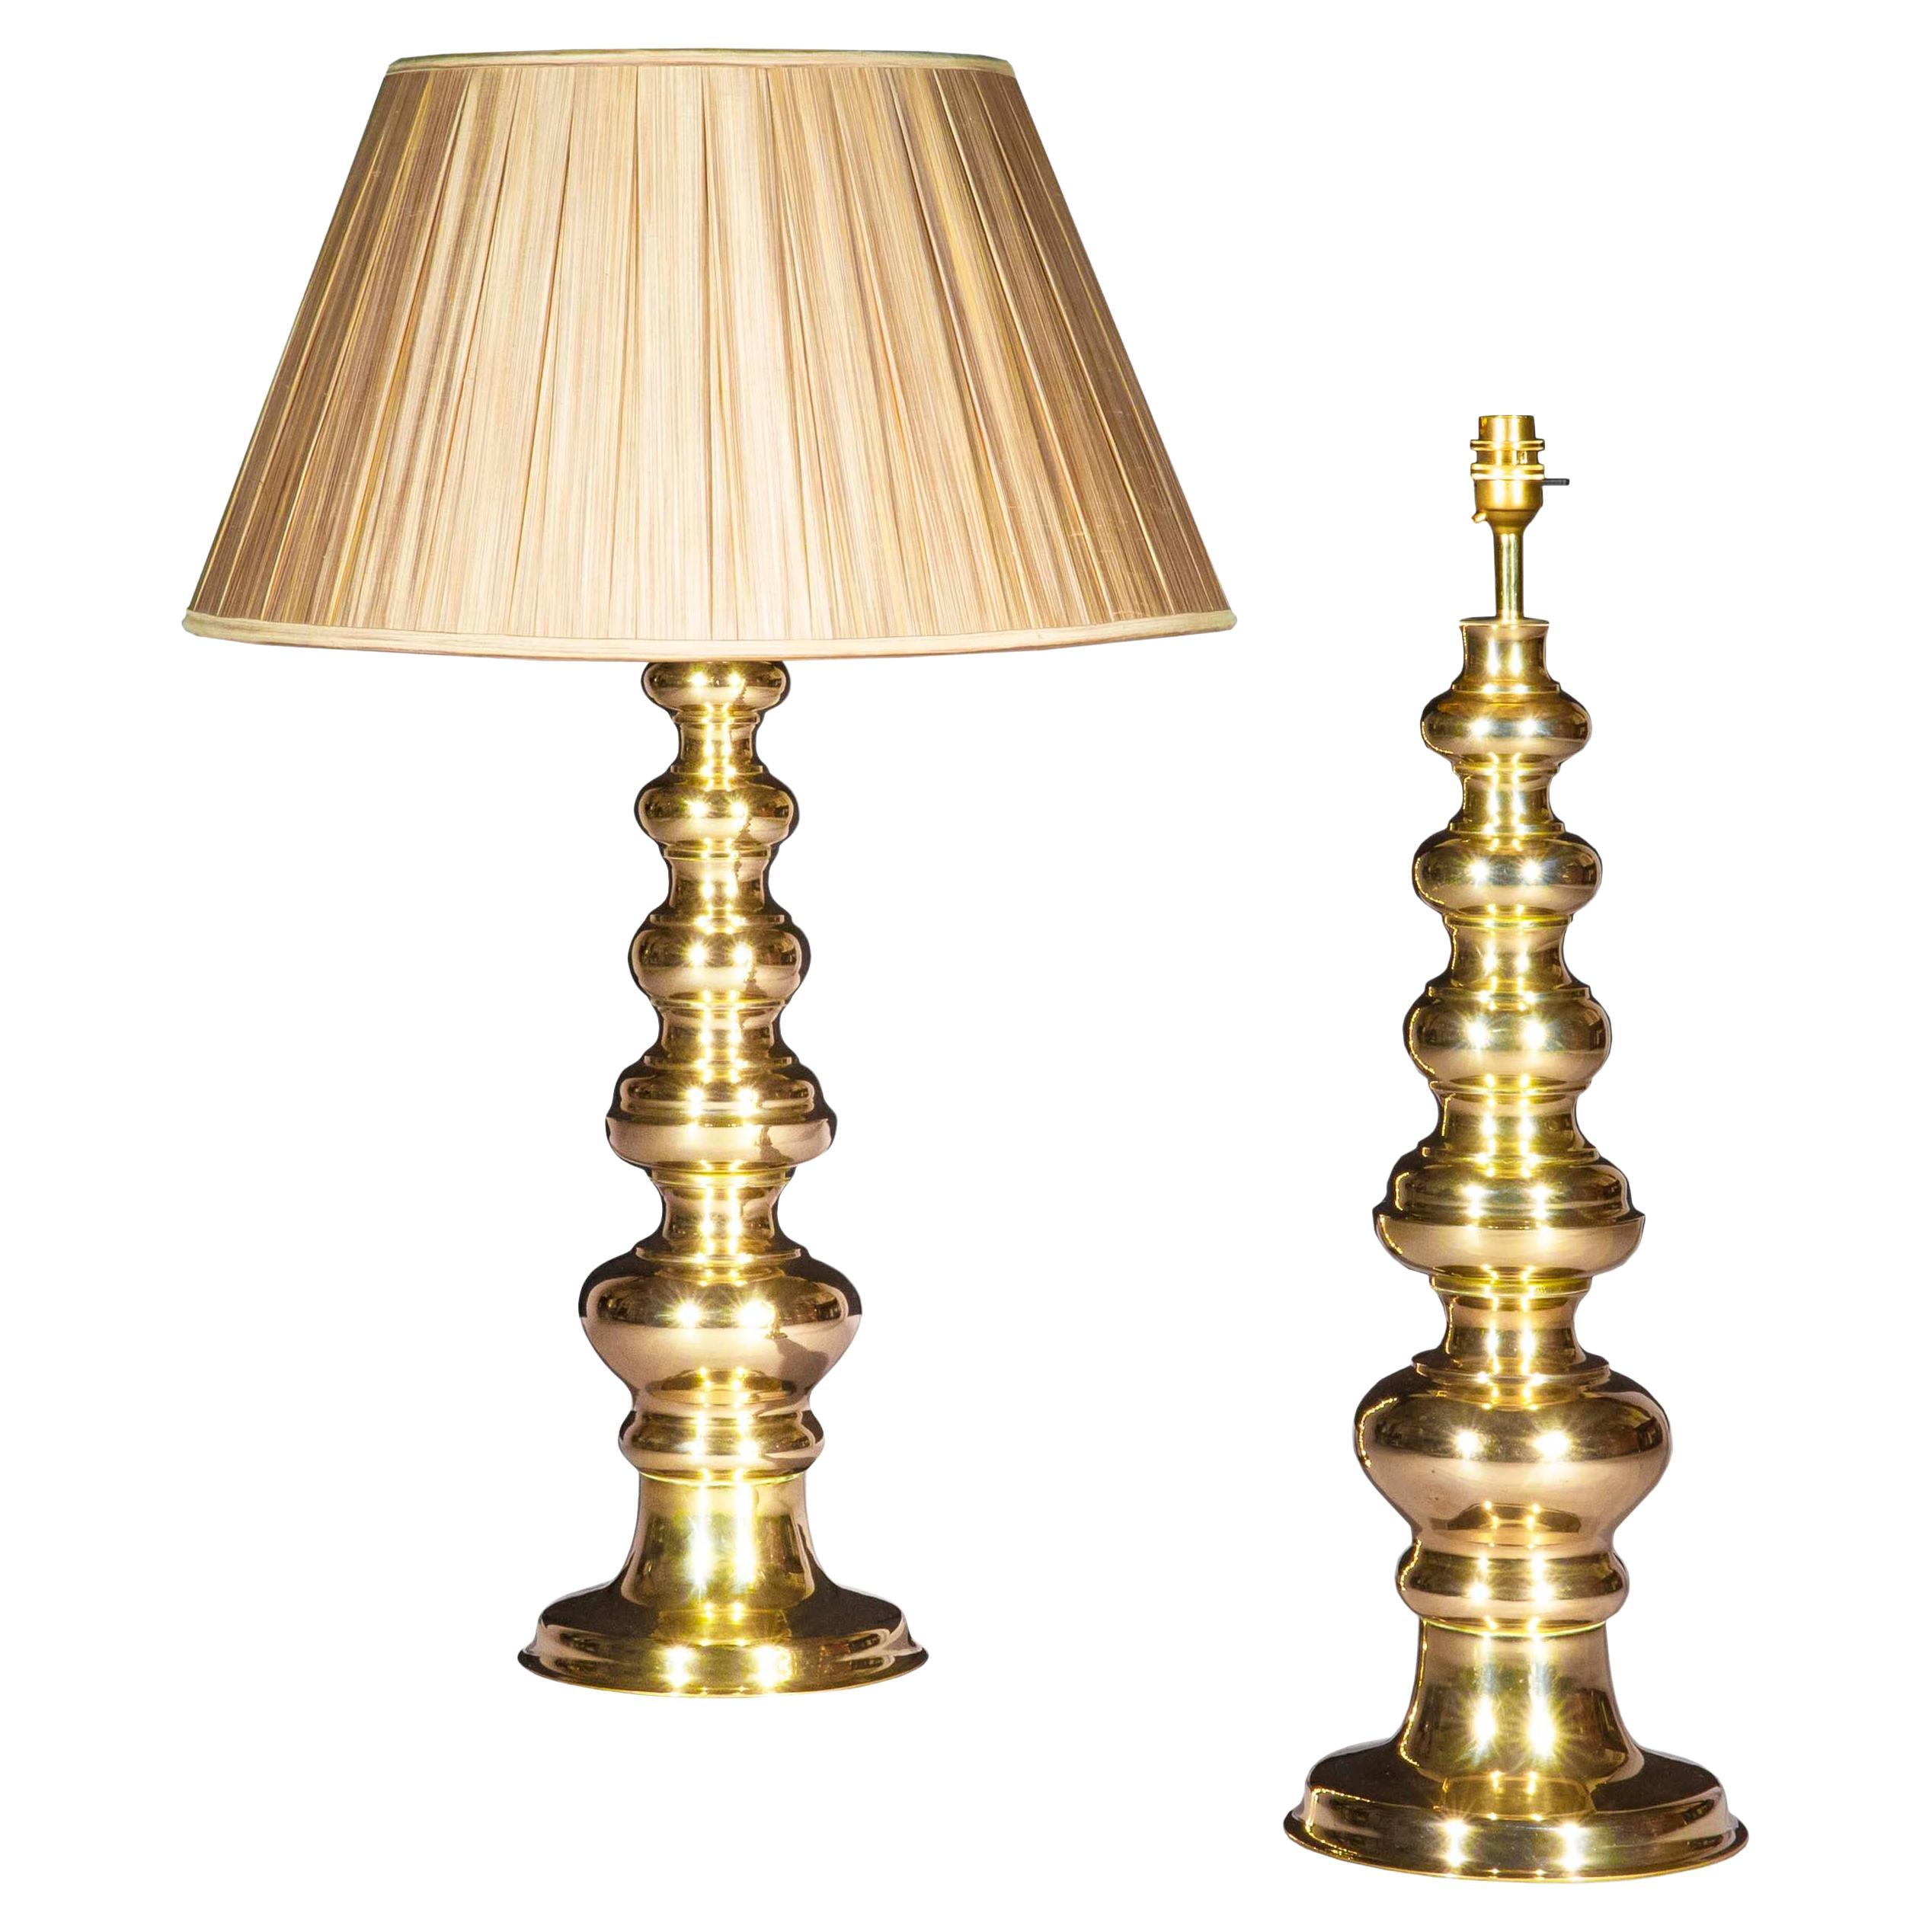 Pair of Large Mid-Century Polished Bronze Lamps For Sale at 1stDibs